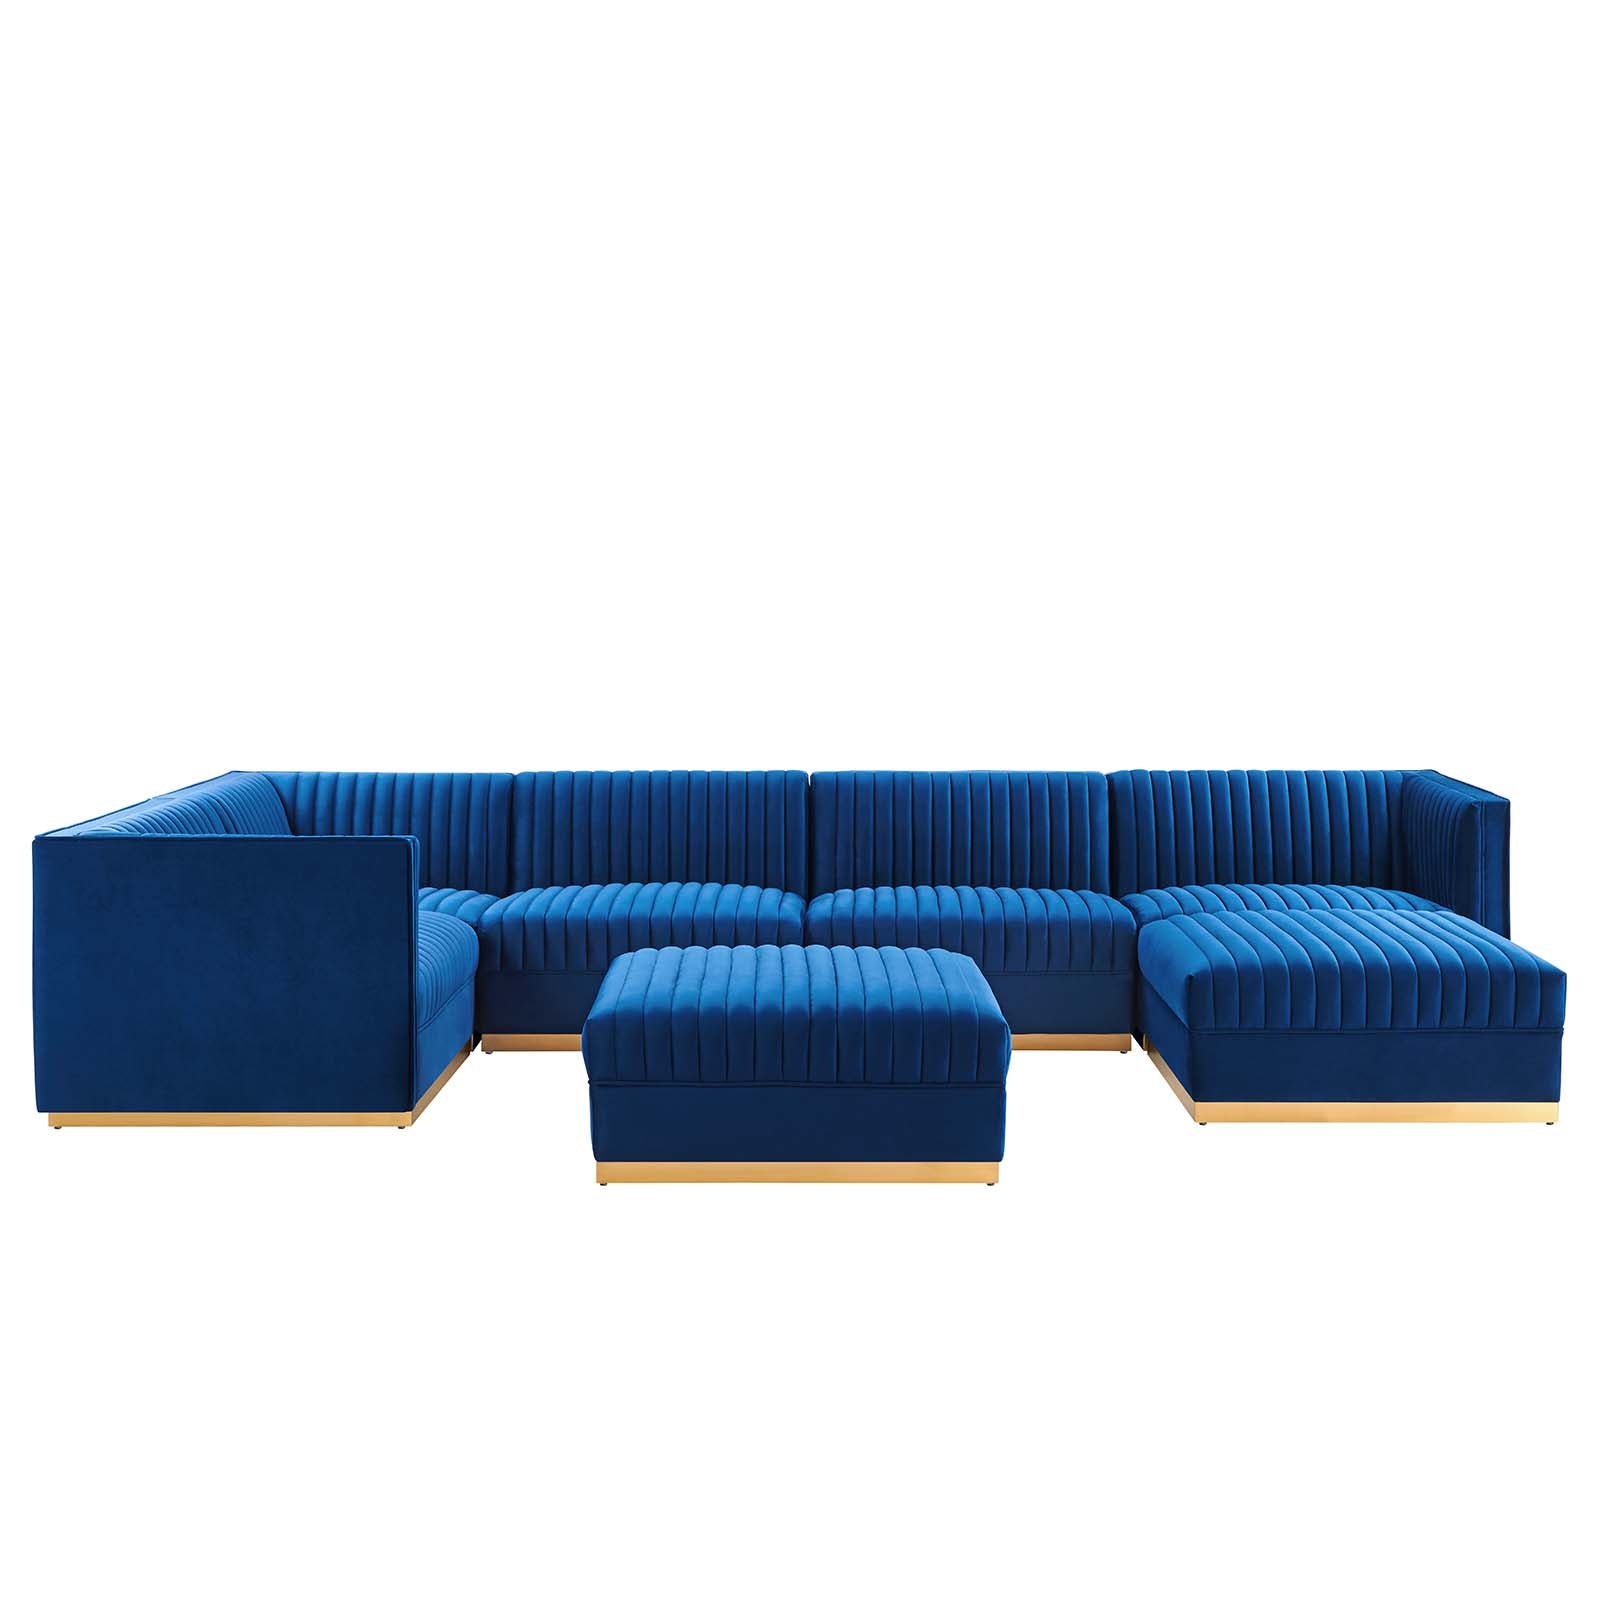 Modway Sectional Sofas - Sanguine Channel Tufted Performance Velvet 7-Piece Left-Facing Modular Sectional Sofa Navy